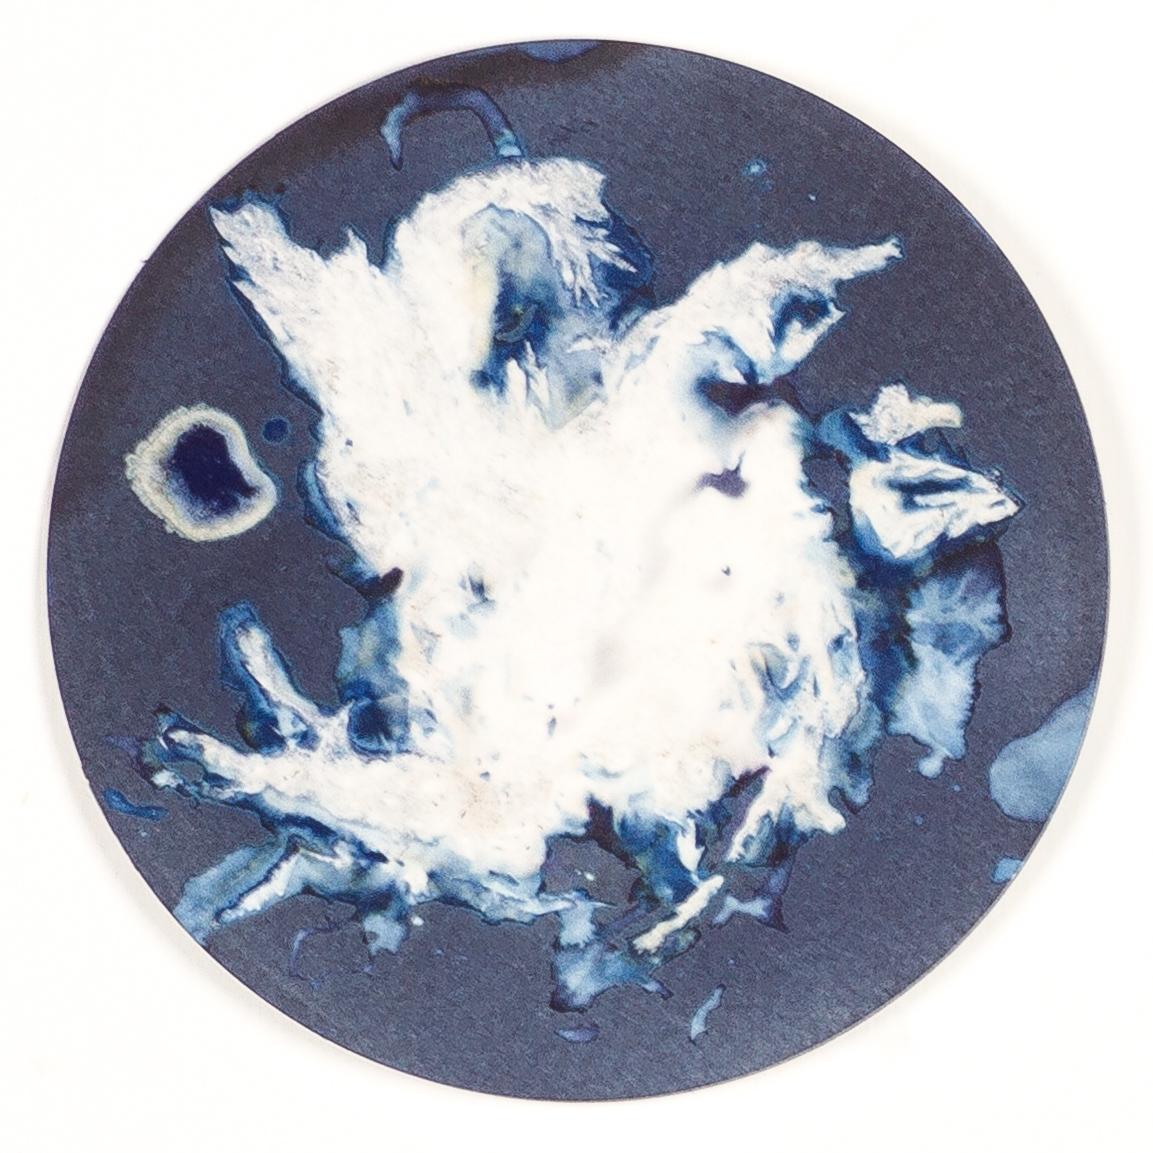 Algas 23, 63 y 64. Cyanotype photograhs mounted in high resistance glass dish - Sculpture by Paola Davila